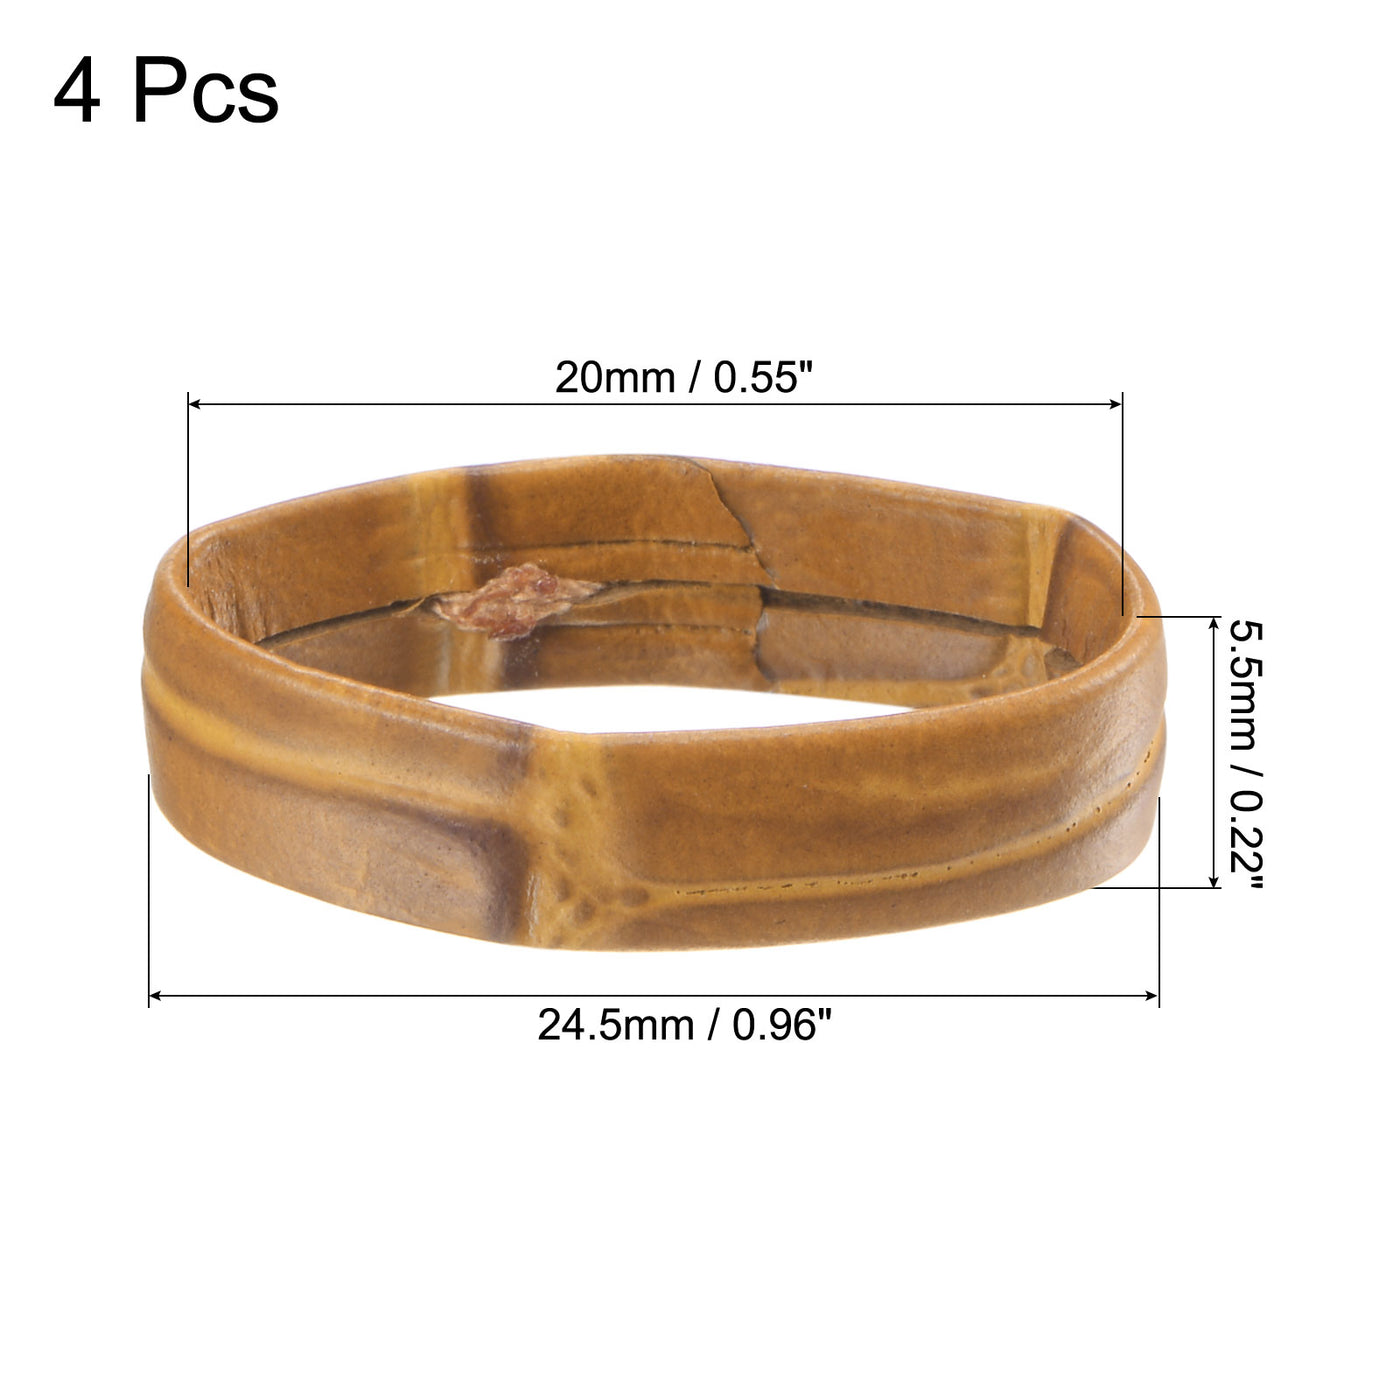 Uxcell Uxcell 4 Pcs PU Leather Loops Retaining Ring for 20mm Width Watch Band, White